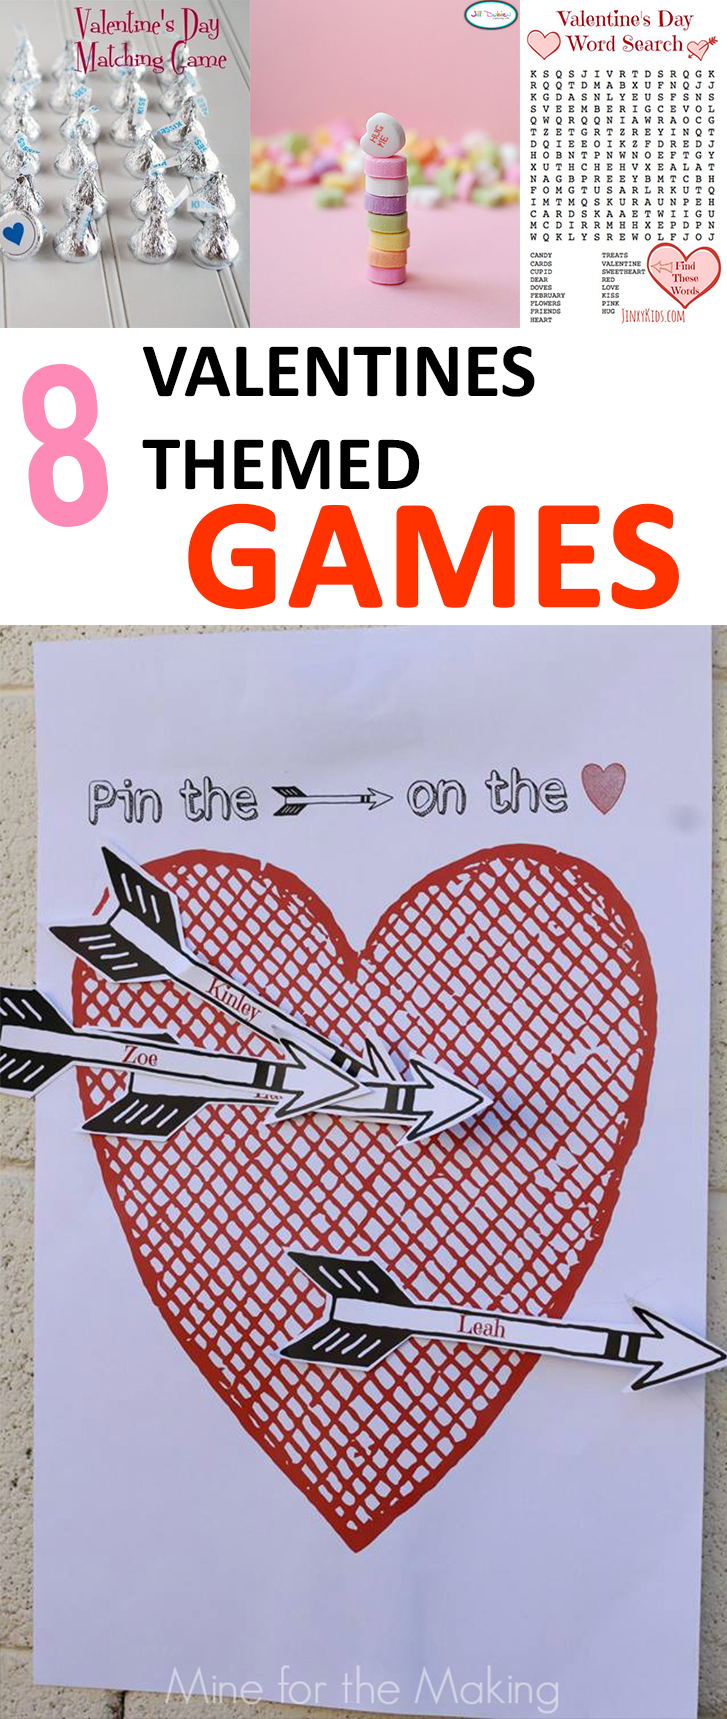 8 Valentines Themed Games